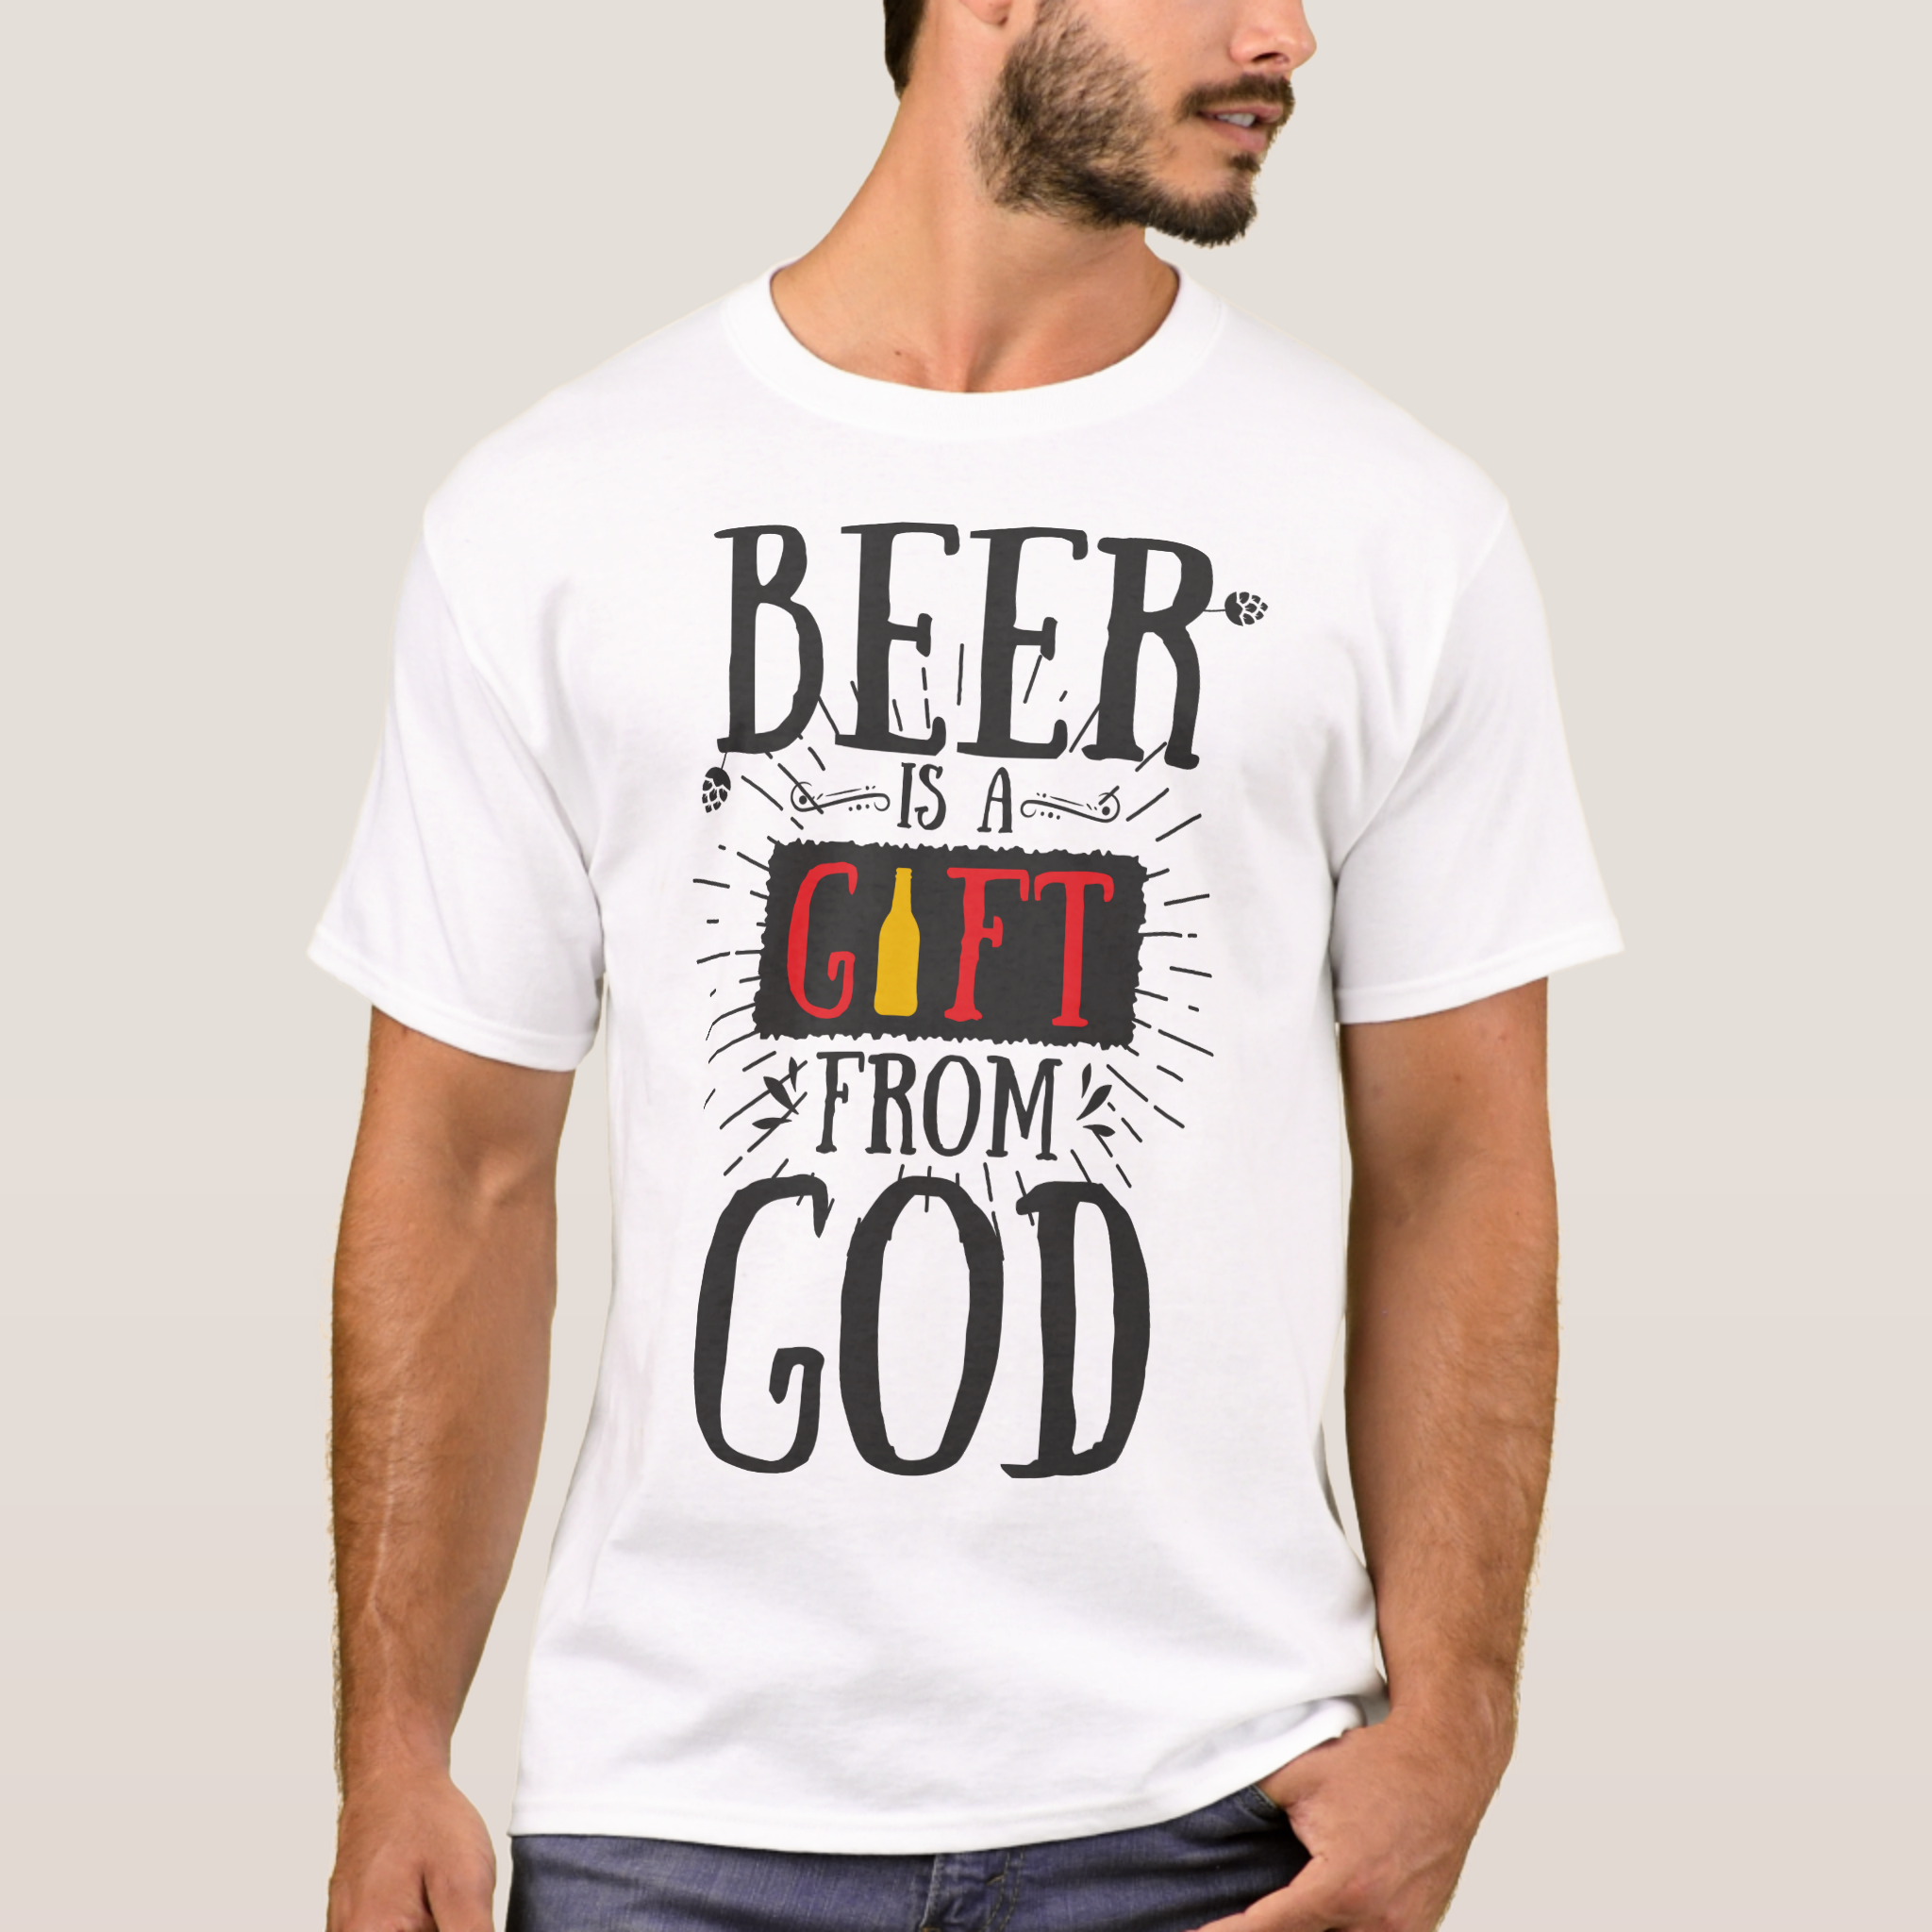 Футболка "Beer is a Gift from God"